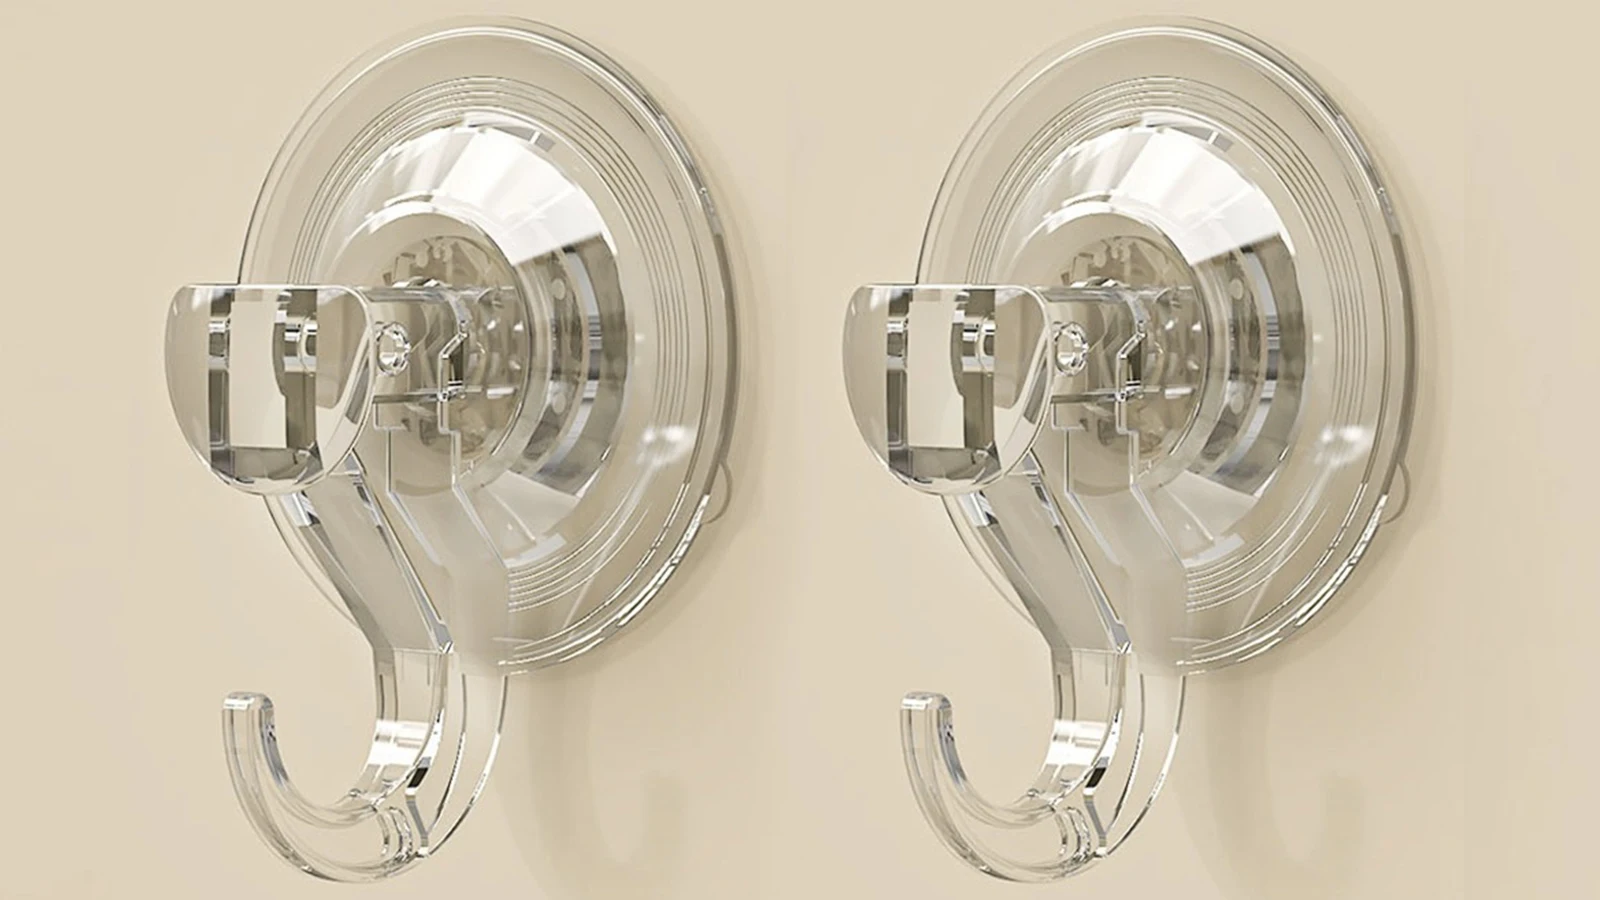 Types of Shower Curtain Hooks: A pair of clear glass hooks on a beige wall.